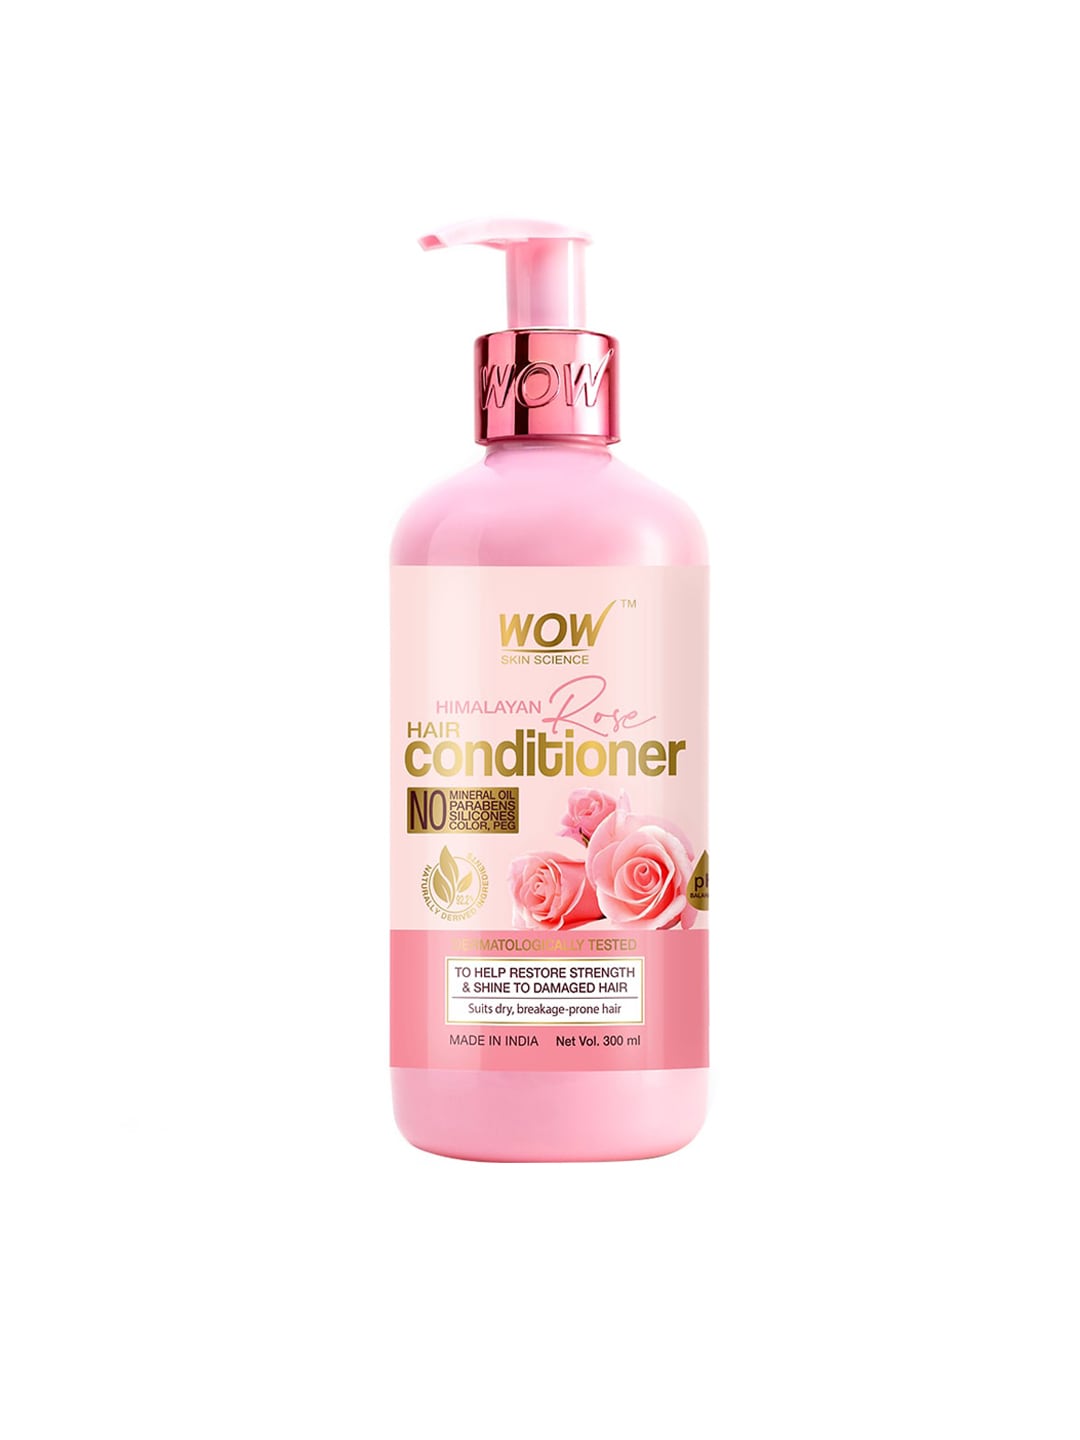 WOW SKIN SCIENCE Himalayan Rose Conditioner 300 ml Price in India